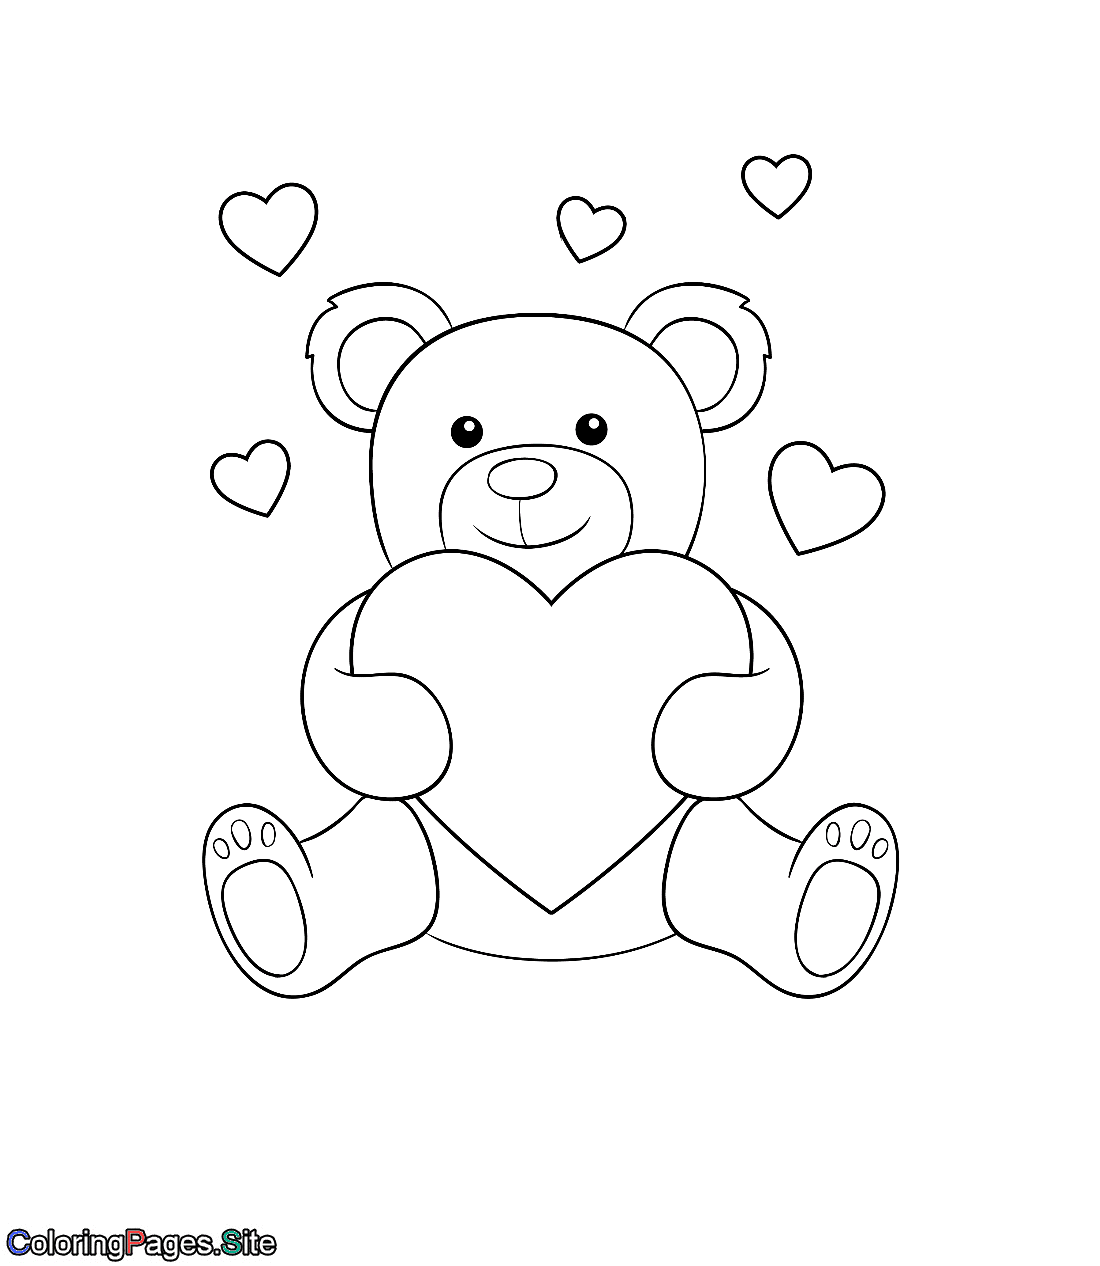 Heart bear online coloring page